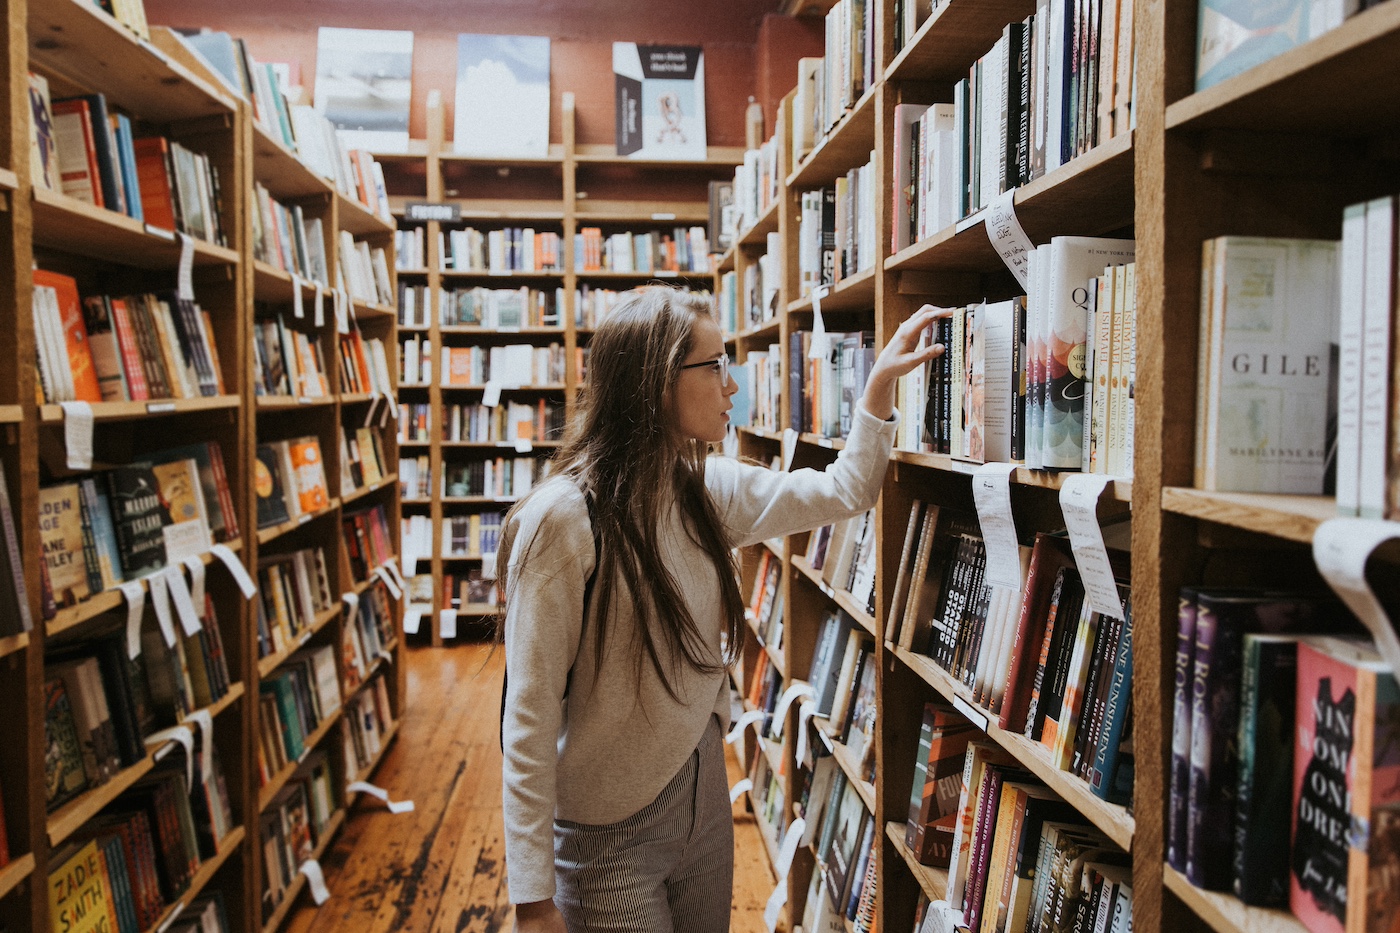 A white woman with long hair stand in between shelves of books. Her arm is extended, selecting a book from one of the shelves.